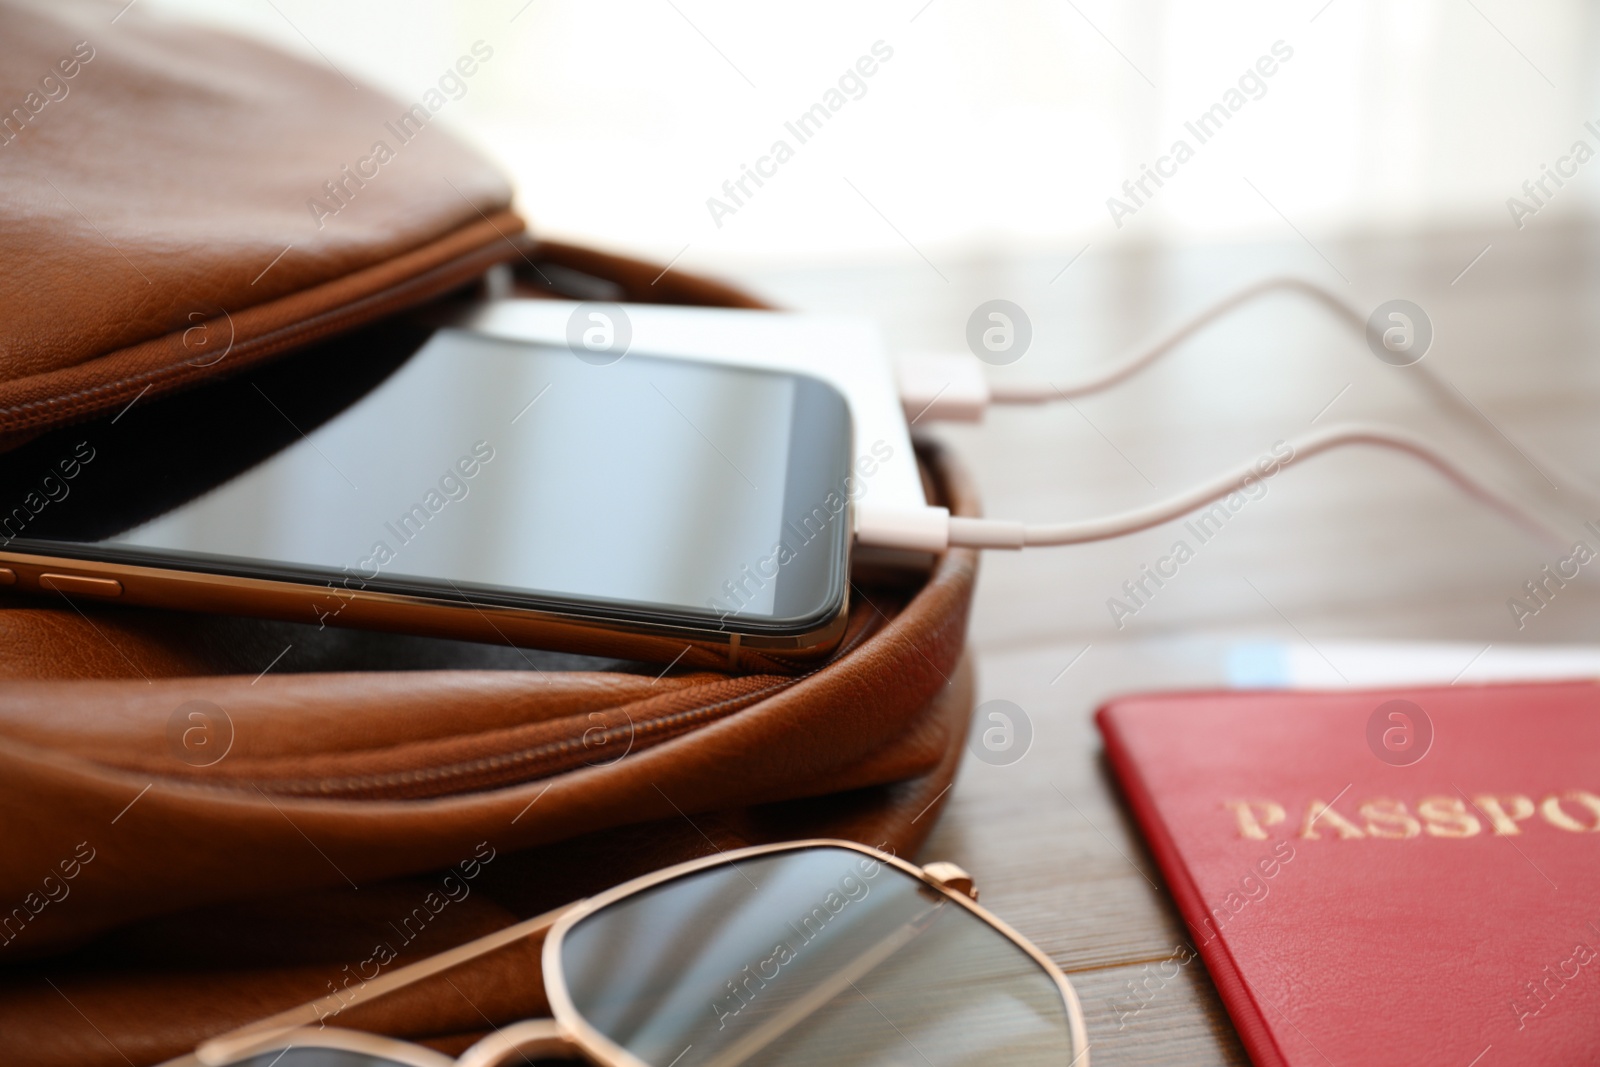 Photo of Charging mobile phone with power bank in backpack on wooden table, closeup